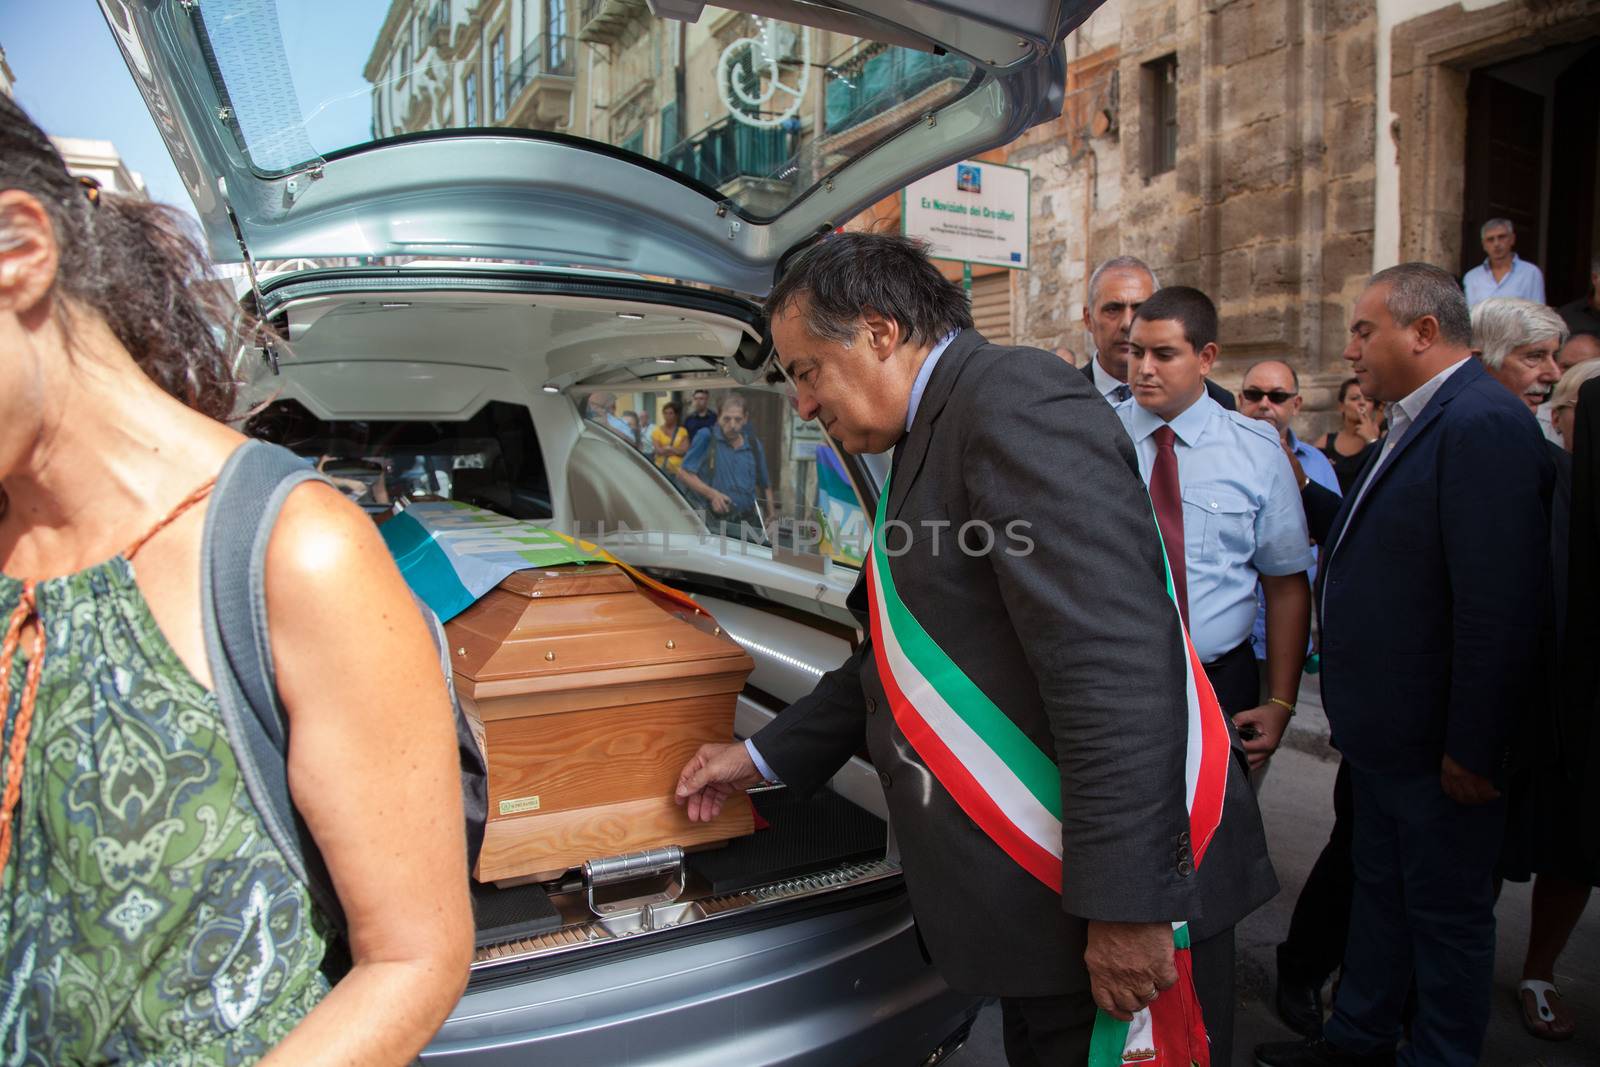 ITALY, Palermo: 	The funeral of Giovanni Lo Porto was held on September 18, 2015, with Mayor Leoluca�Orlando declaring a day of mourning in the city.  	Lo Porto, an aid worker, was being held captive by al-Qaida along with American Warren Weinstein.  	The pair were mistakenly killed during a U.S. drone strike in January. 